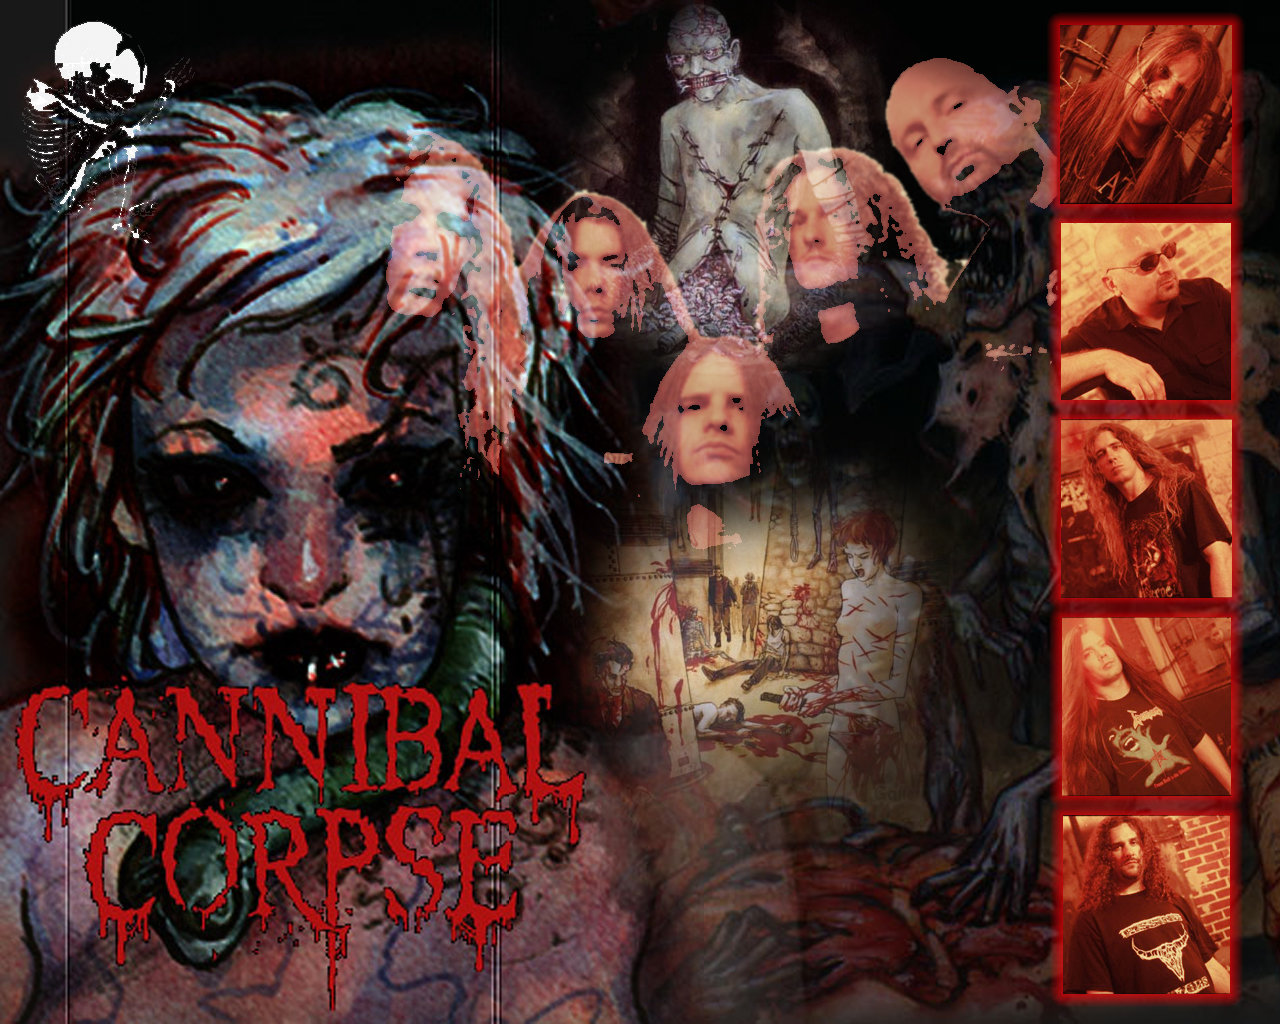 Cannibal Corpse 2 by Replicated on DeviantArt